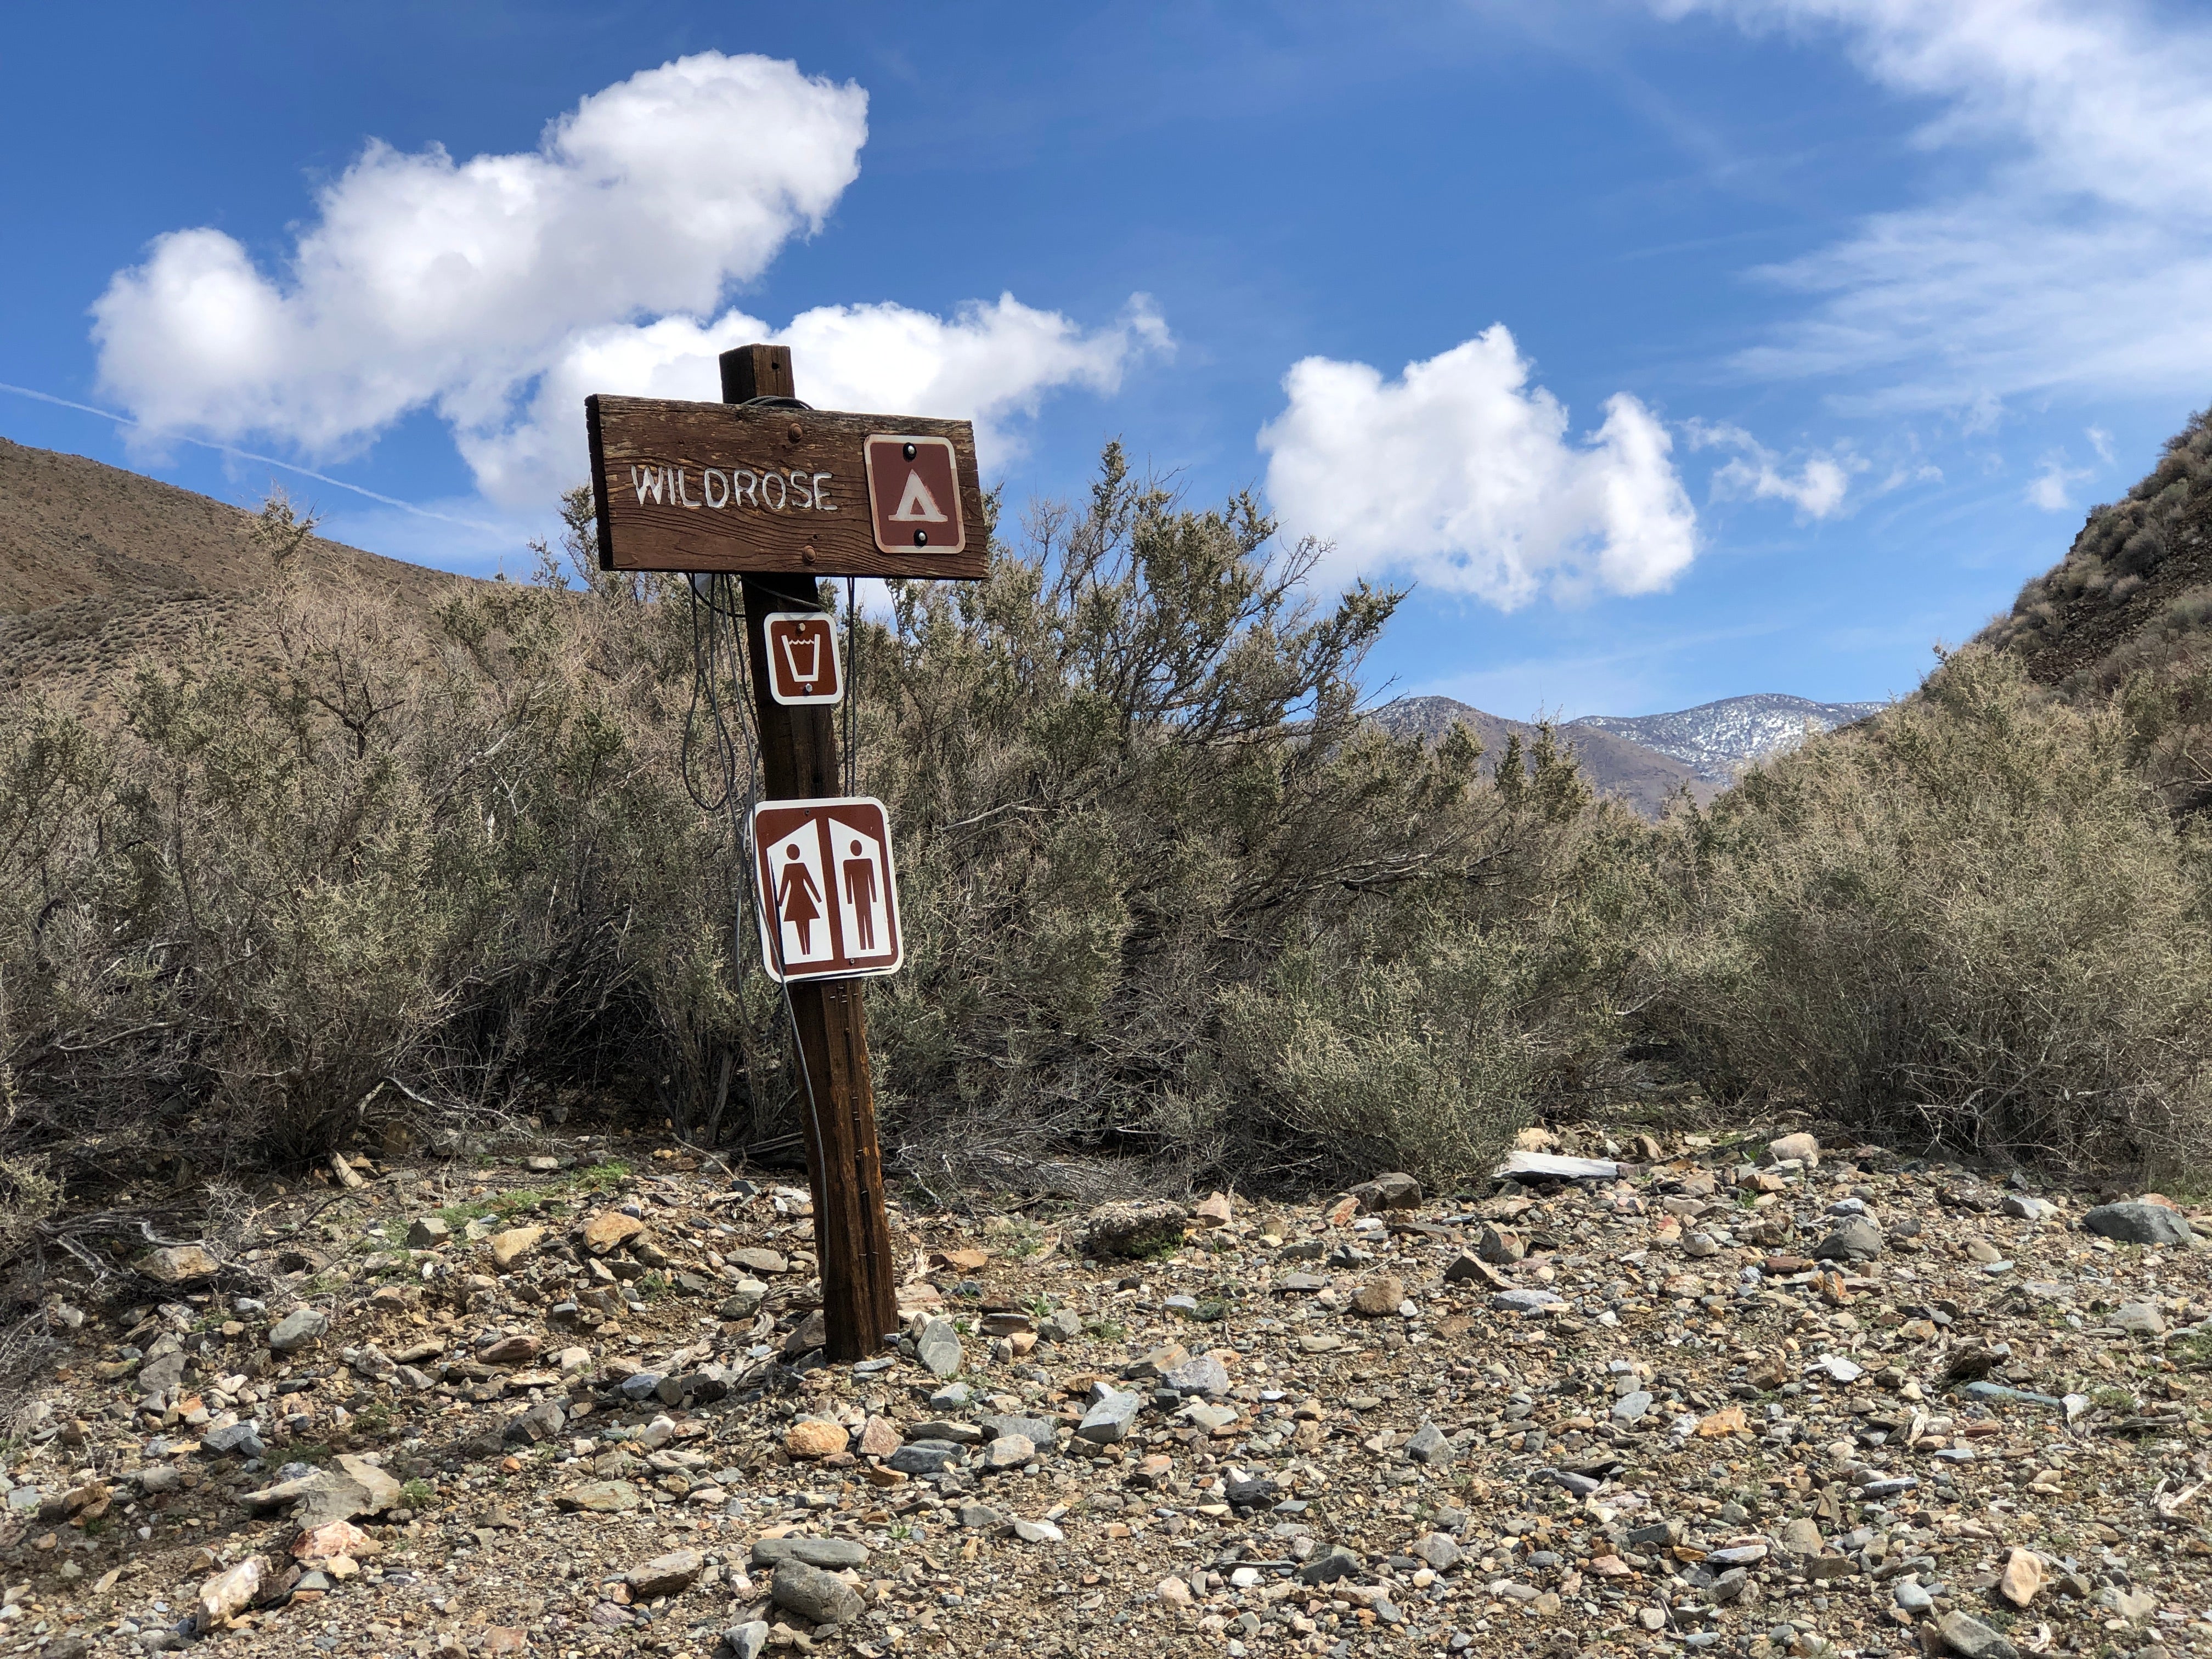 Camper submitted image from Wildrose Campground in Death Valley - 3